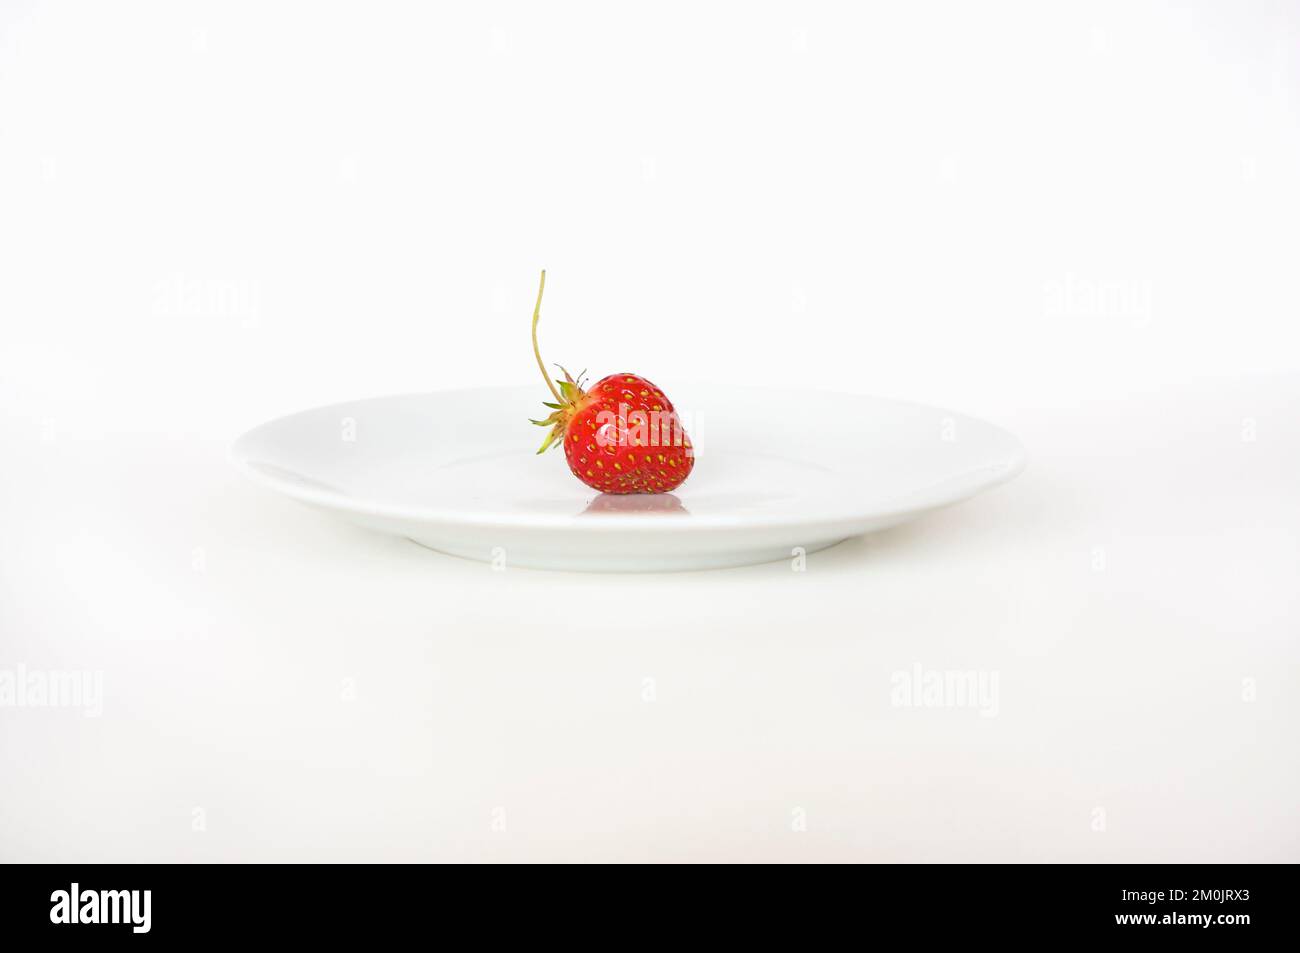 A single ripe red strawberry sitting on a white plate against a bright, clean white background with lots of copy space. Stock Photo